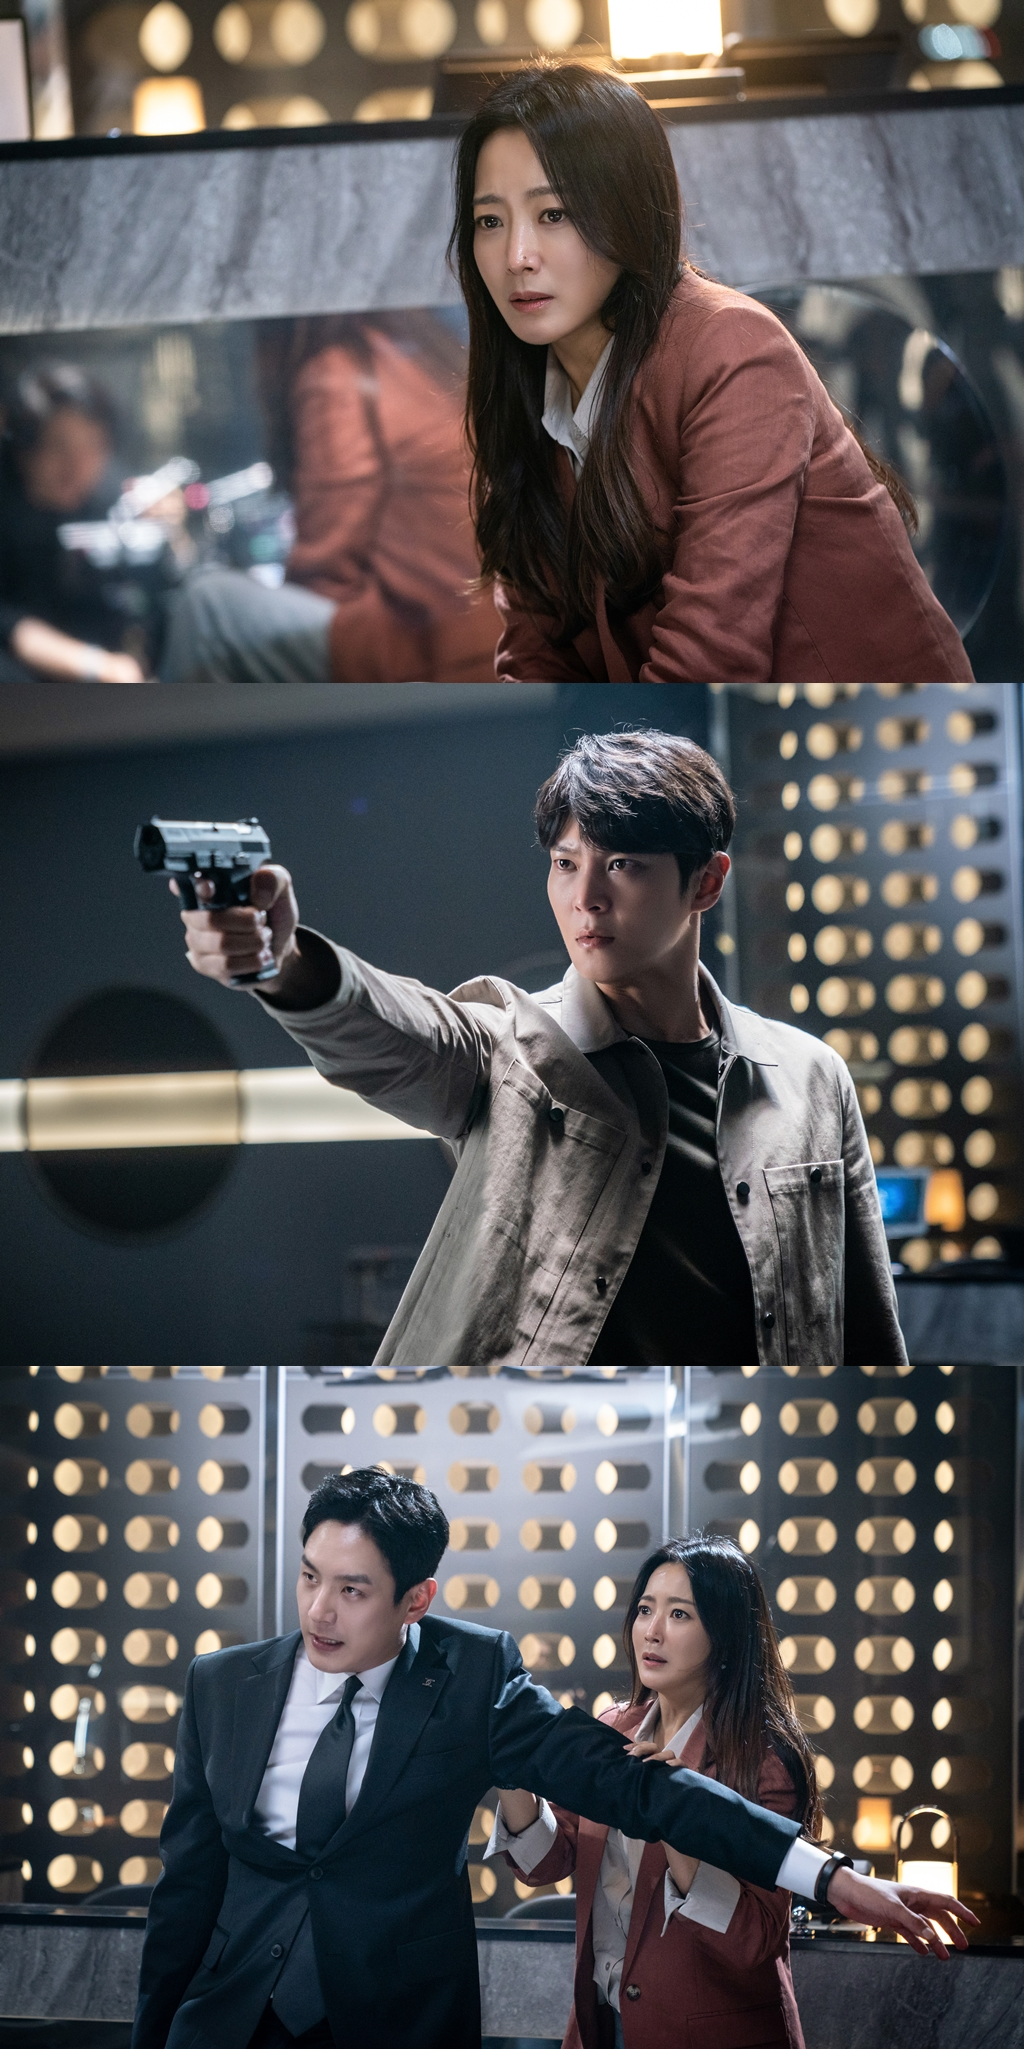 maekyung.com news teamAlices Kim Hee-sun, Joo Won, and Kwak Si-yang were in one place.Alice is running toward the end.In particular, Park Jin-gyeom (Joo Won) turned around in the last 14 endings and raised a knife to Kim Hee-sun, drawing attention to what story he will tell for the remaining two.On the 23rd, the production team of Alice will reveal the three people who faced Alice in the 15th episode, Yoon Tae-yi, Park Jin-gyeom and Yoo Min-hyuk, to focus attention.The first thing that attracts attention is Yoon Tae-yis sad appearance, where Yoon Tae-yi, who was always so strong and upright, sits on the floor with a frightened look.Even if she looks at her eyes, which are likely to fall into tears, she can guess how much she is in a precarious WOON situation.In the next photo, Park Jin-gum is pointing a gun at someone, causing curiosity.Park Jin-gum, who suddenly turned around in the 14th episode, cannot predict what Park Jin-gum is in and what is in the situation. The last picture is also intense.Yoo Min-hyuk seems to be trying to protect Yoon Tae-yi. Yoo Min-hyuks eyes are sore as to stop Yoon Tae-yi. What happened to Yoon Tae-yi, Park Jin-gyeom and Yoo Min-hyuk?Yoon Tae-i, Park Jin-gyeom, and Yoo Min-hyuk were the people who were thrown into the saddest fate by Journey to the Center of Time.Yoo Min-hyuk came to Journey to the Center of Time in 1992 and lost his beloved lover Park Sun-young, and did not know that she and her child were born.Park Jin-gum, who was born so, witnessed the murder of his mother Park Sun-young due to Journey to the Center of Time, and did not even know the existence of his father, Yoo Min-hyuk.Yoon Tae-yi lost his father due to Journey to the Center of Time, and was in danger because he held the secret of the last chapter of the prophecy related to Journey to the Center of Time.In this regard, the production team of Alice said, In the 15th episode that is broadcast today (23rd), Yoon Tae-yi, Park Jin-gyeom and Yoo Min-hyuk face Alice.And this shocking situation will make these three peoples fates even more sad and saddening.As the drama is heading for the climax, Kim Hee-sun, Joo Won, and Kwak Si-yang three actors played a breathtaking hot performance.I would like to ask for your interest and expectation in the story of three people who will hold the breath of viewers and knock on the audiences Chest. The story of Yoon Tae-yi, Park Jin-gyeom and Yoo Min-hyuk gathered at Alice ahead of the final battle can be confirmed at the 15th SBS Golden Earth Drama Alice, which is broadcasted at 10 pm tonight on Friday, October 23